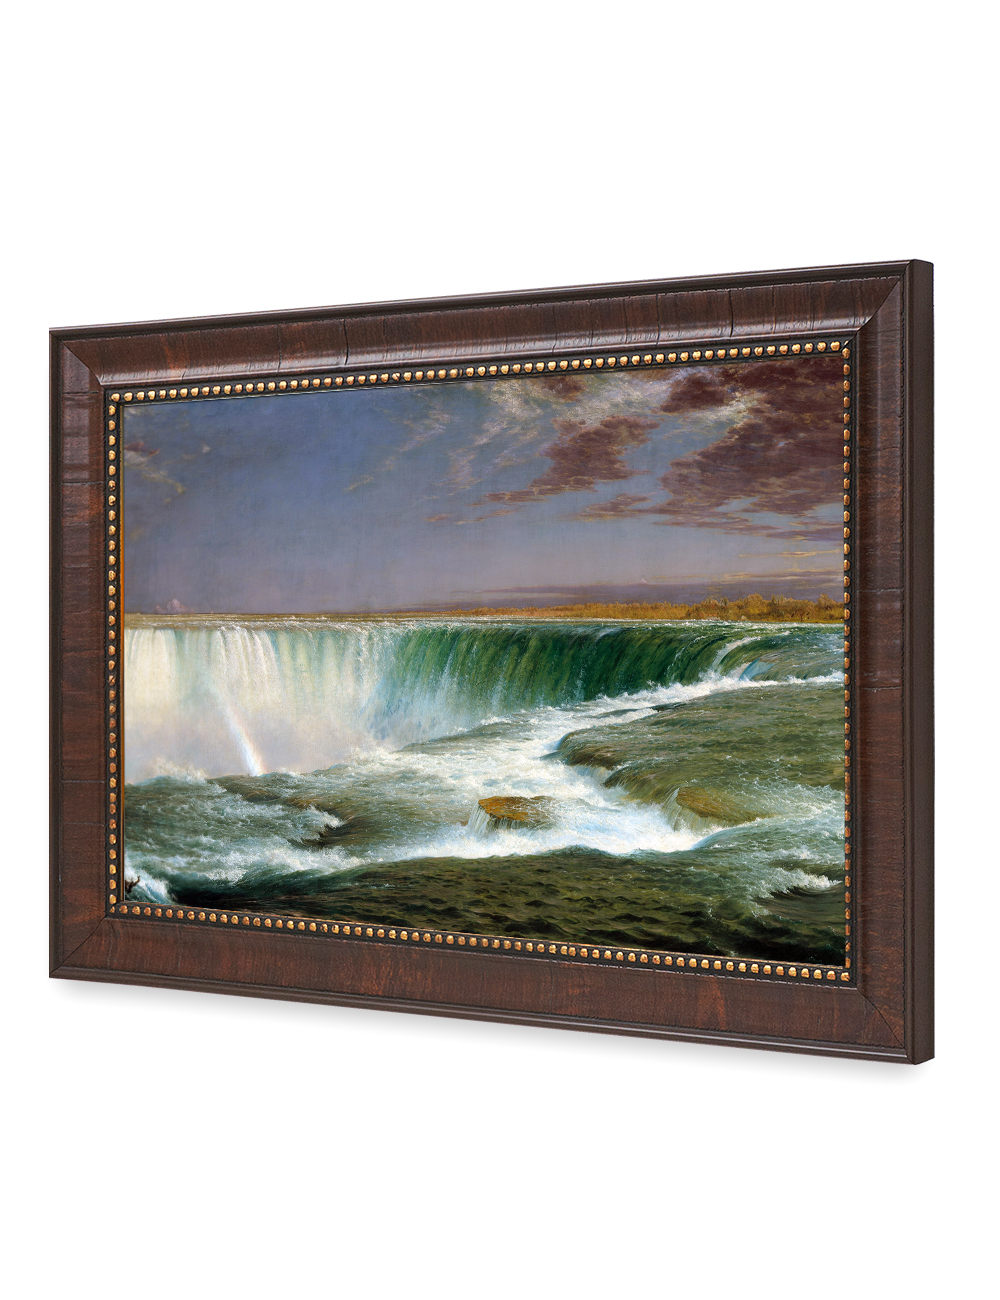 DECORARTS Niagara Falls by Frederic Edwin Church, Giclee Print on Canvas.  Ready to Hang Framed Wall Art for Home and Office Decor. Total Size w/ Frame:  21x15